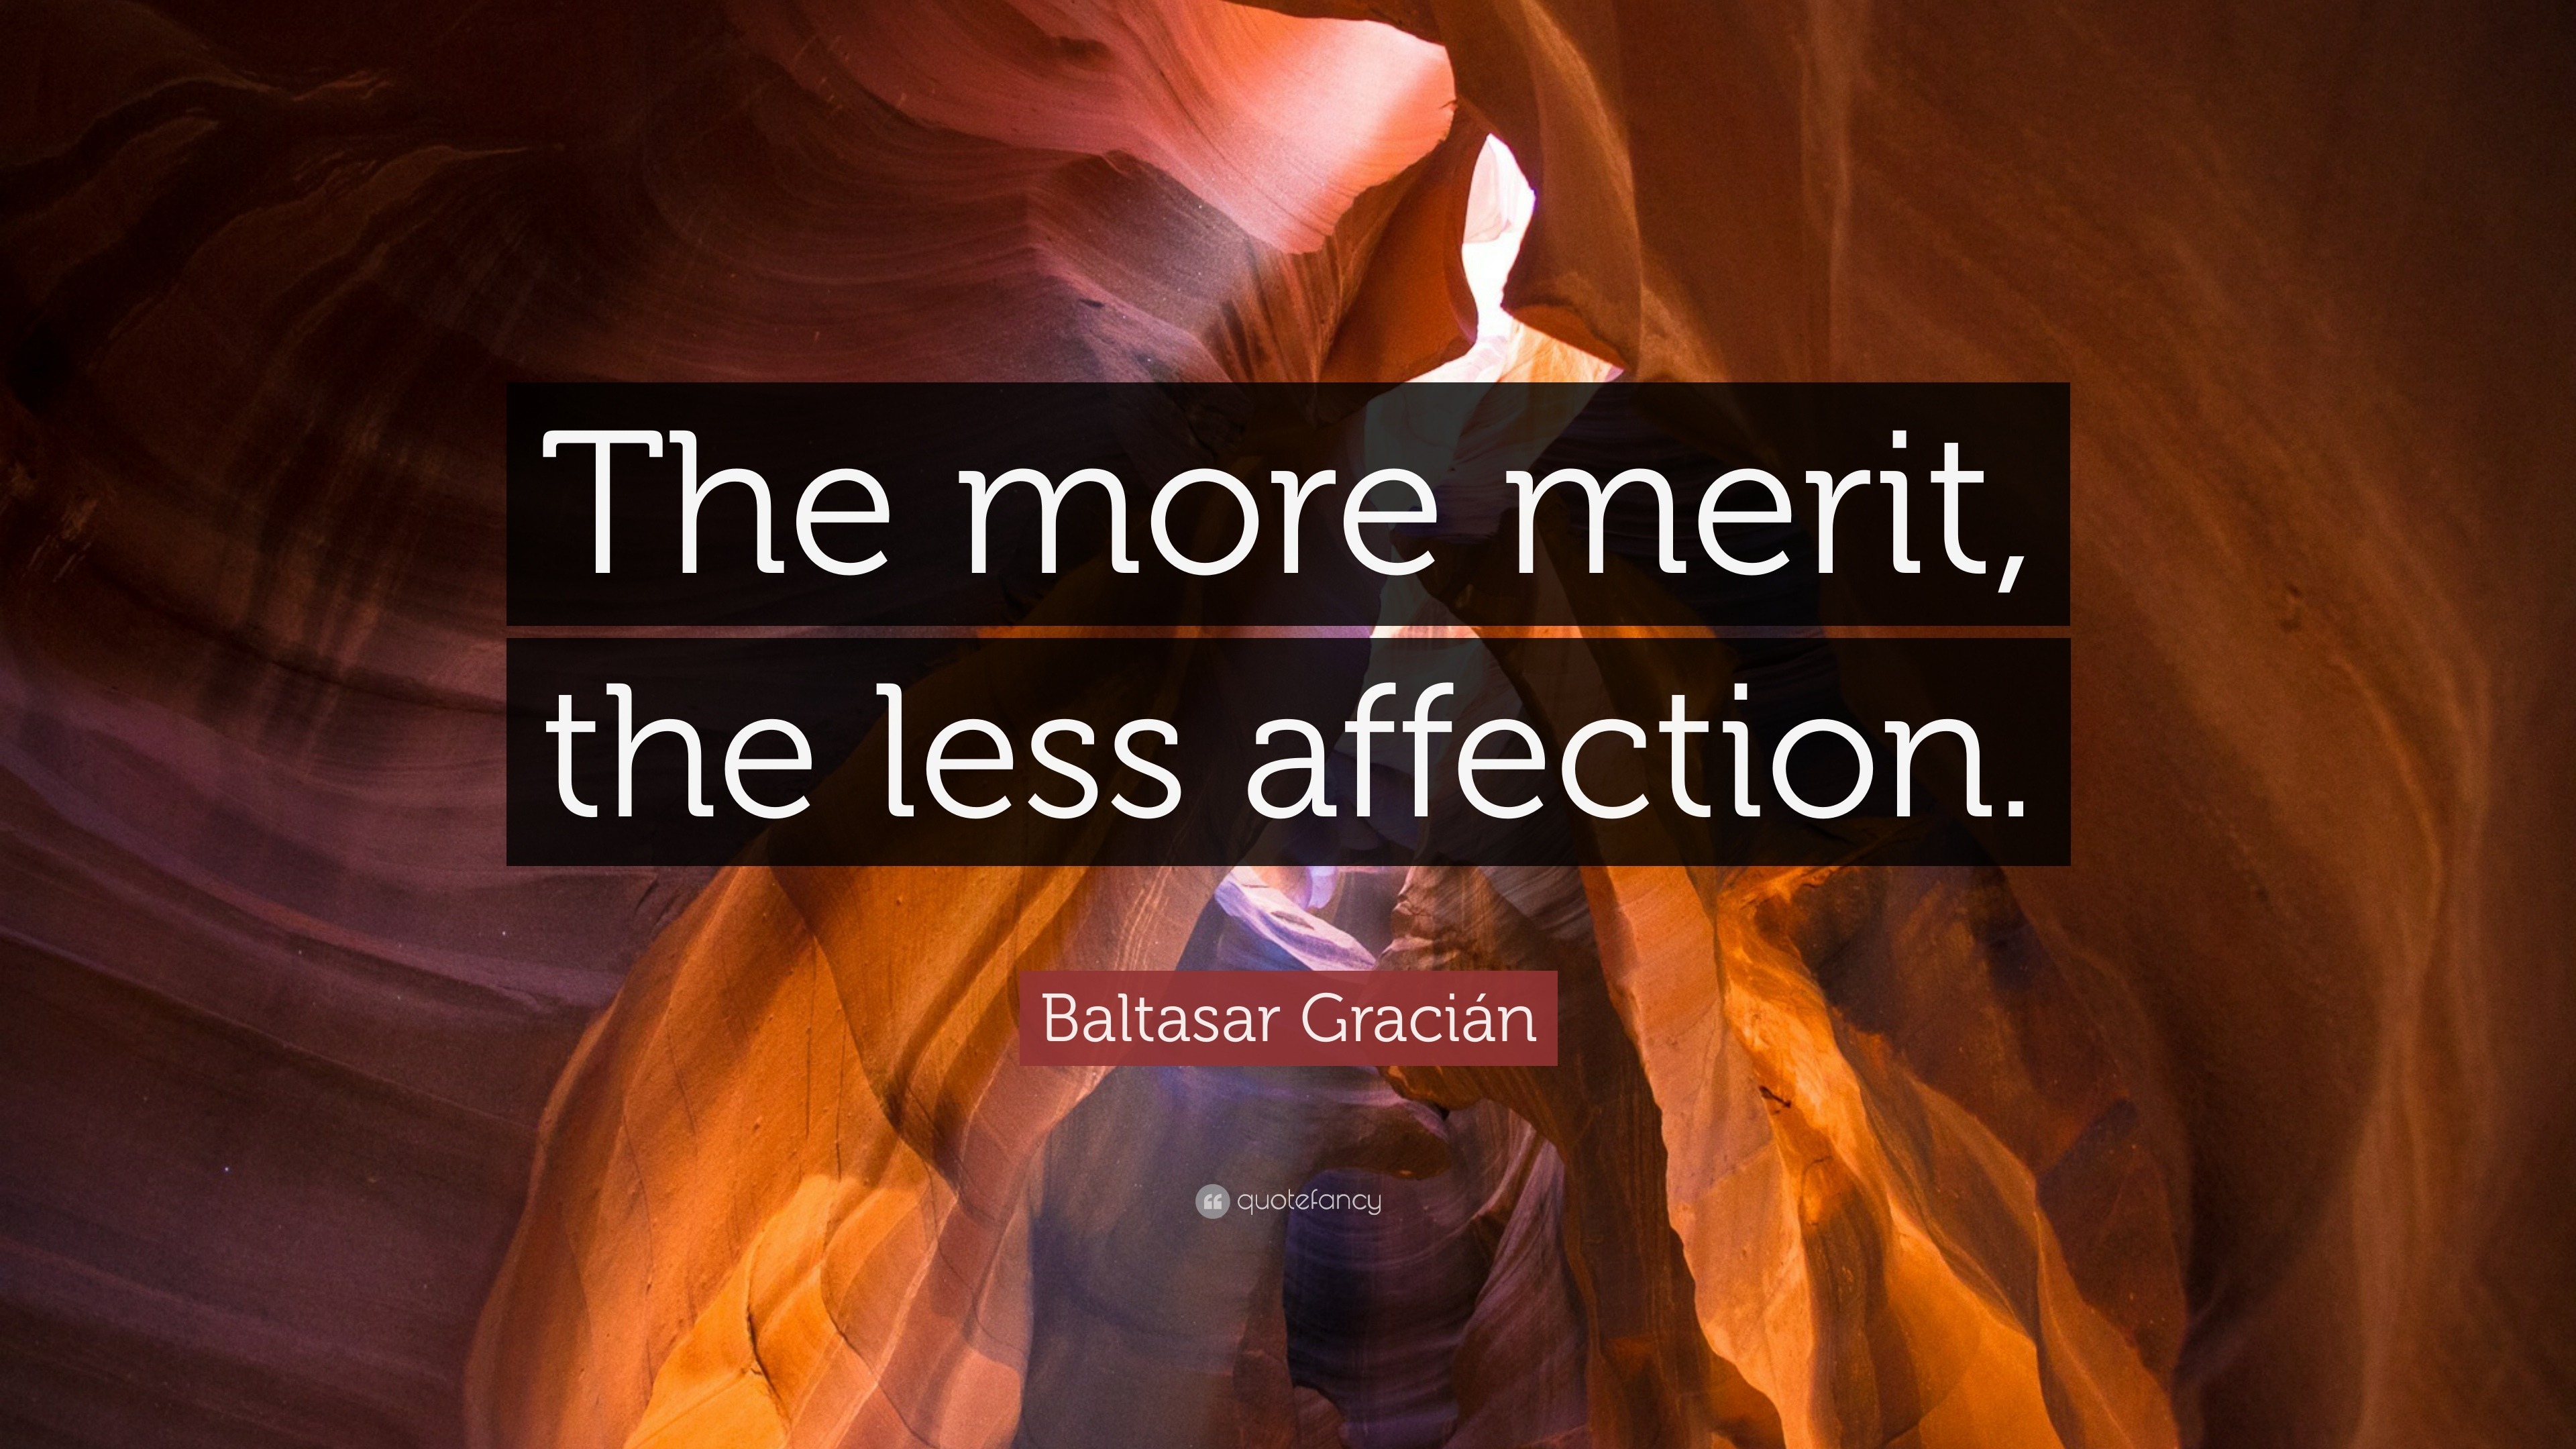 baltasar gracián quote: "the more merit, the less affection.